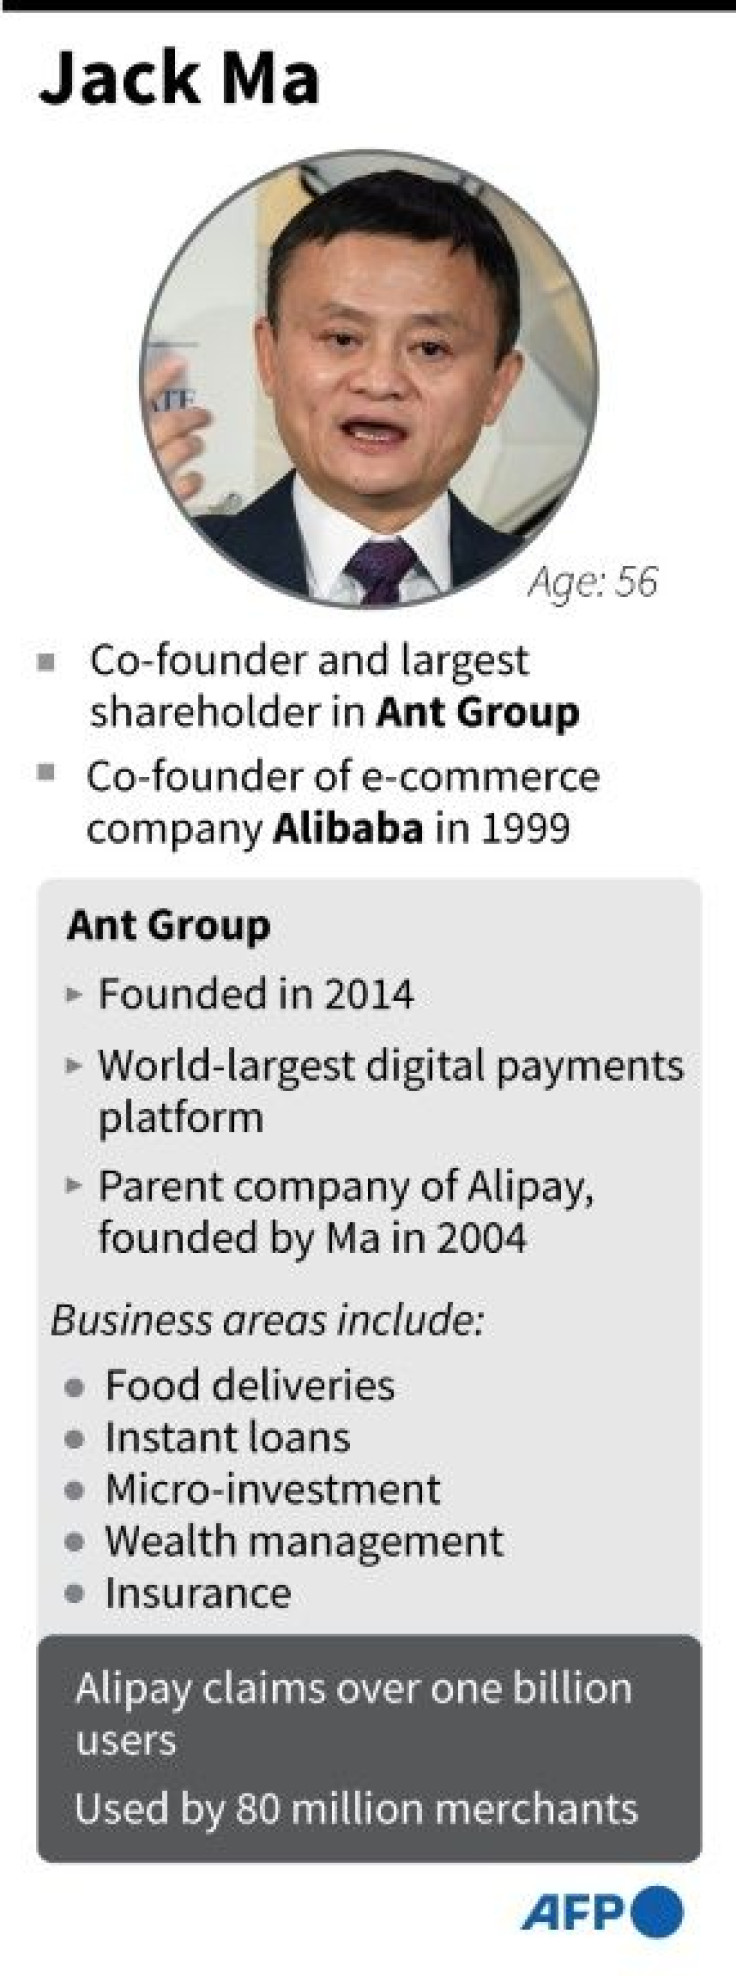 Profile of Jack Ma, co-founder of Chinese e-commerce giants Alibaba and Ant Group.